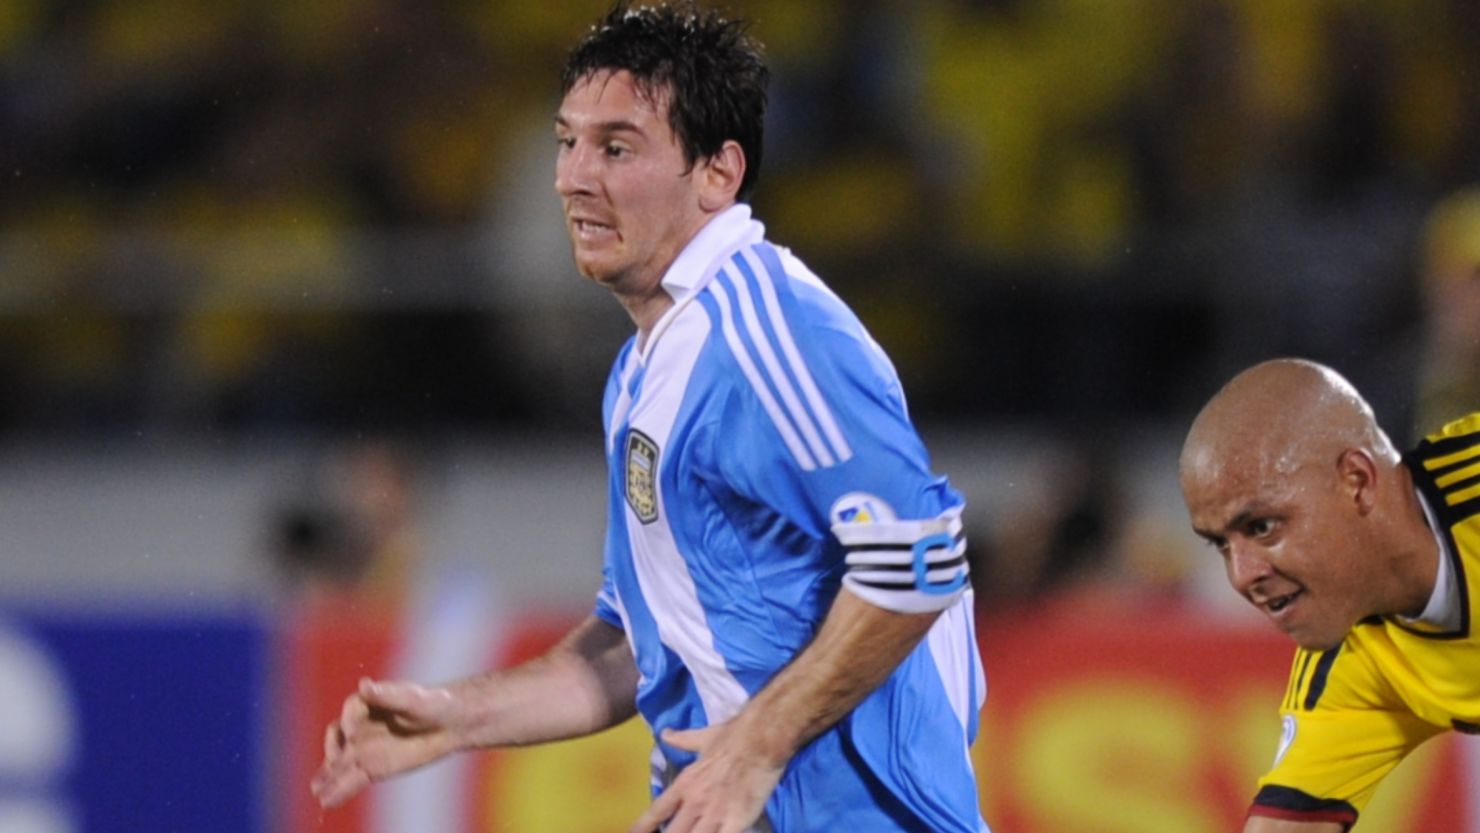 Argentina's Lionel Messi was the winner of the 2010 FIFA Ballon d'Or and is up for the award again this season